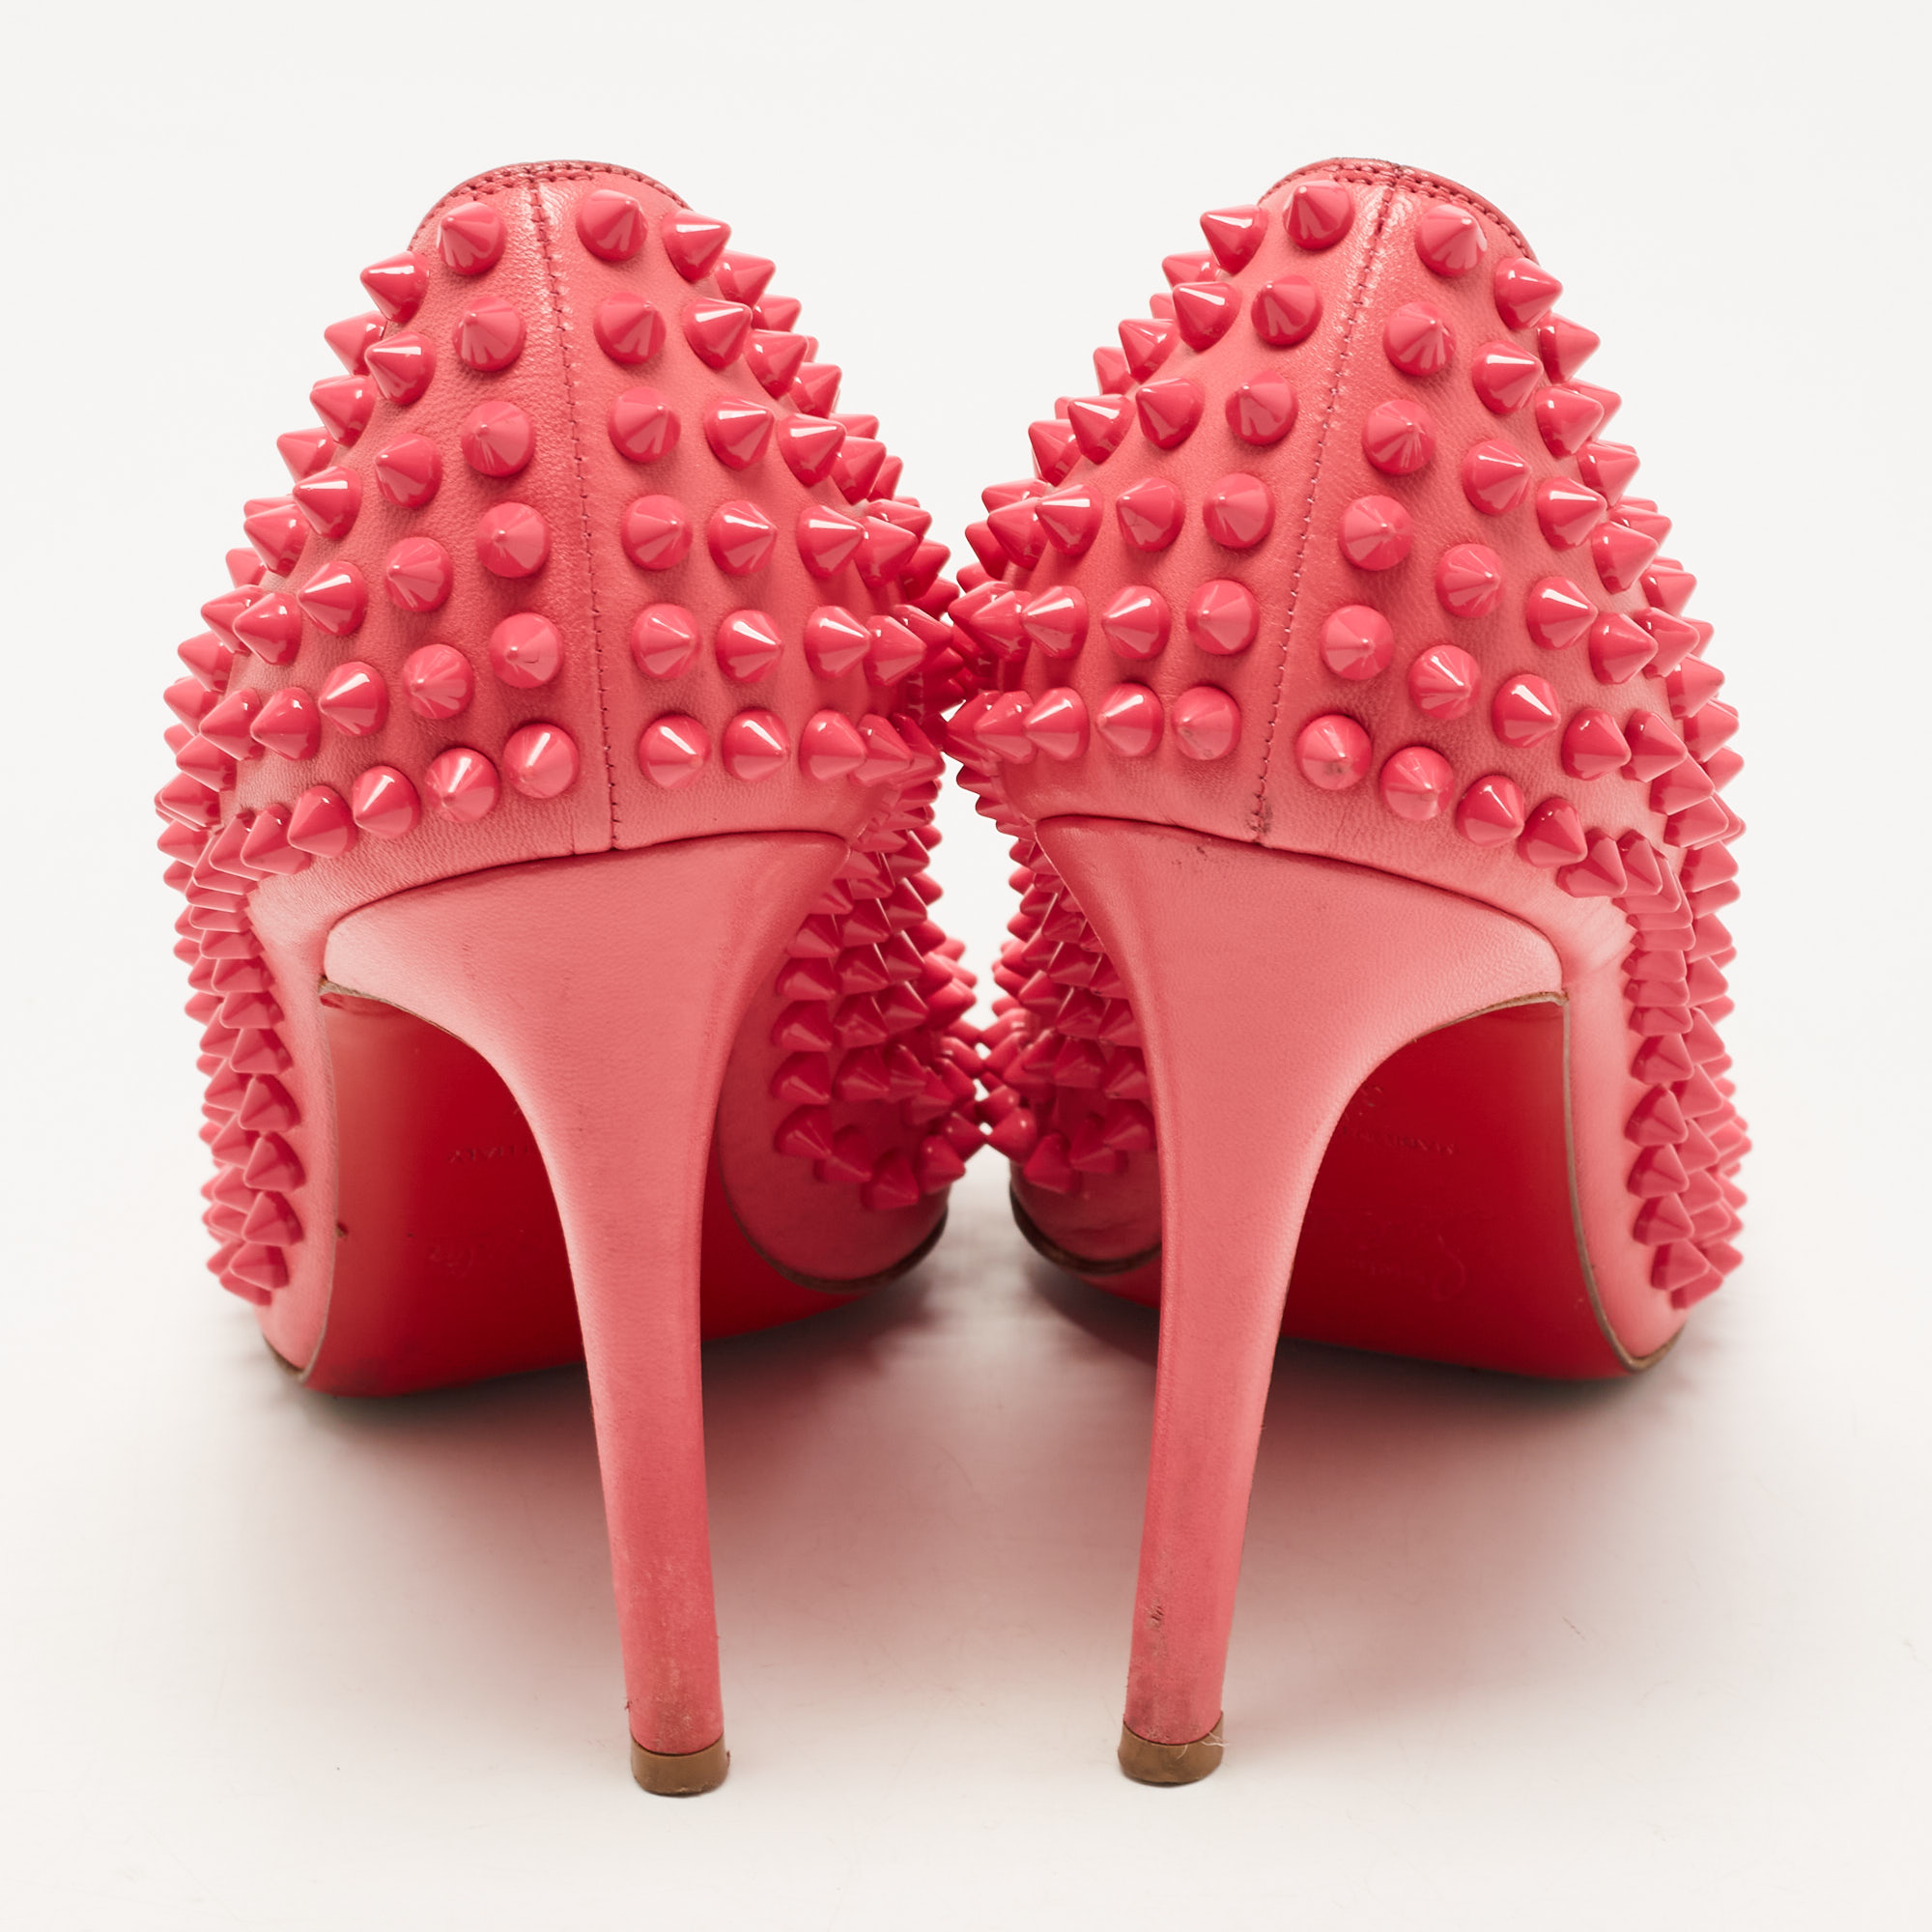 Christian Louboutin Pink Leather Pigalle Spikes Pumps Size 37